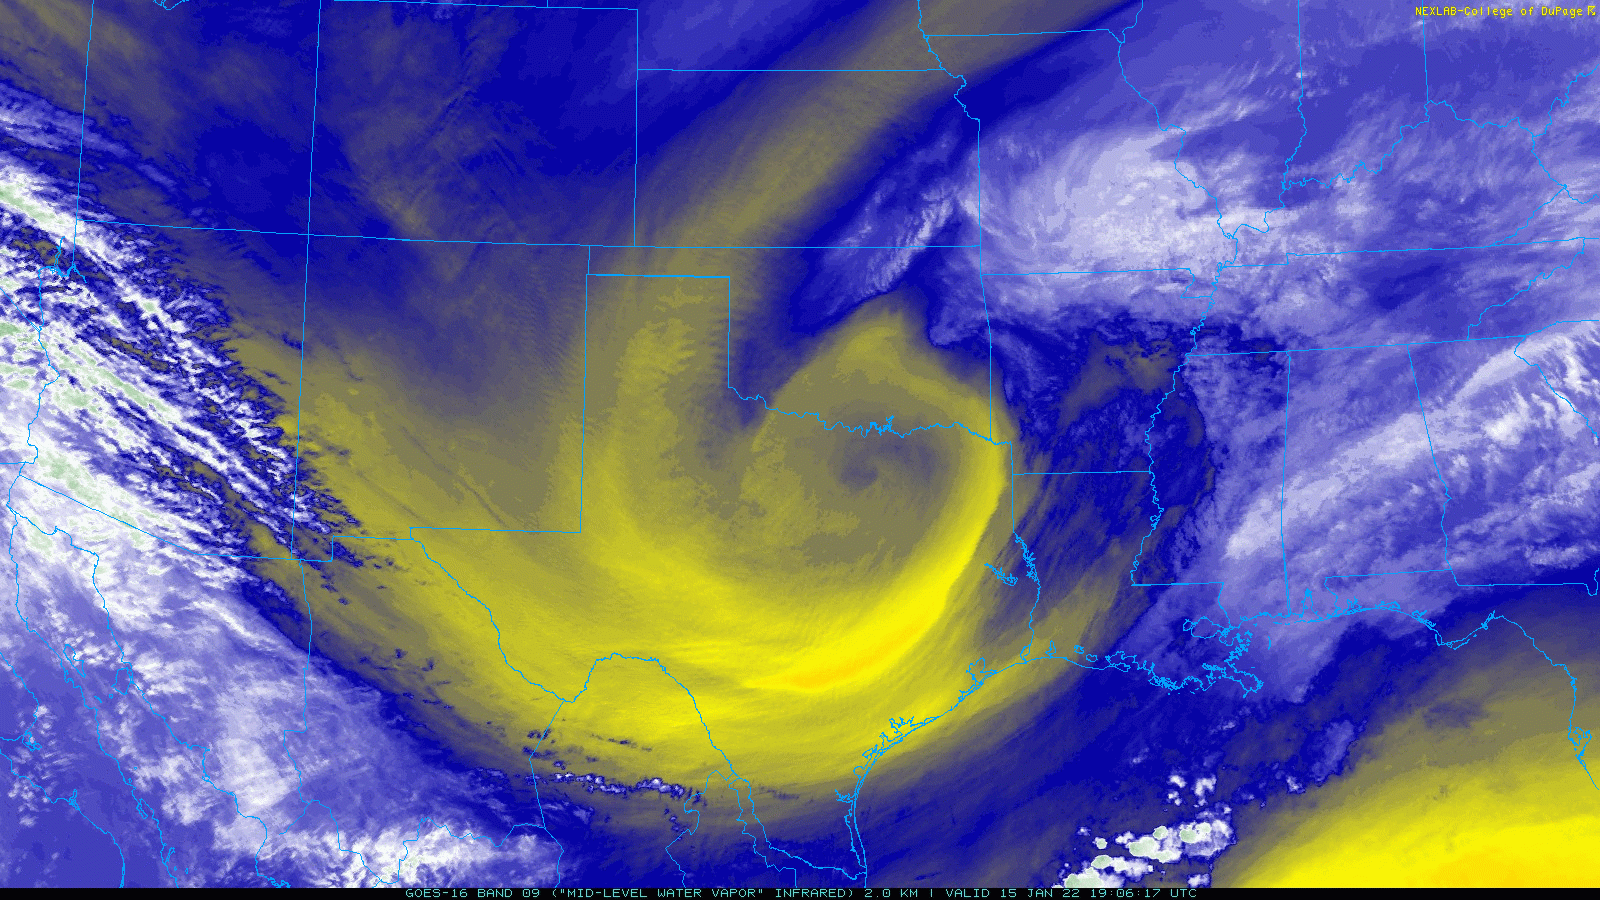 Water vapor loop from 1:06 pm to 1:36 pm on Saturday (15 January 2022). A mature storm system is seen spinning southward over North Texas.